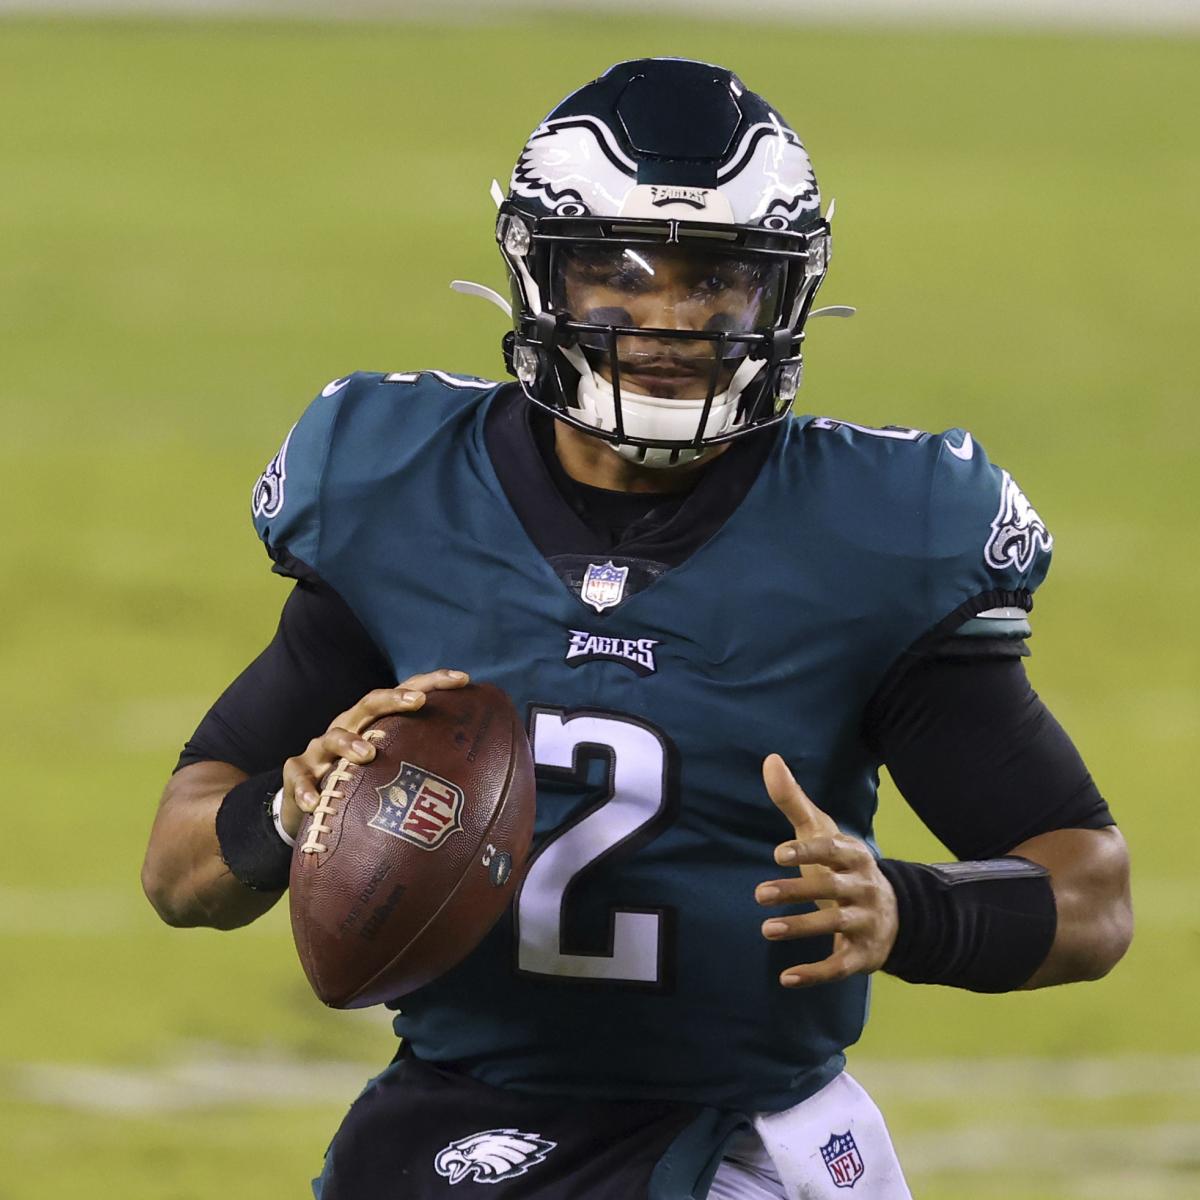 Eagles QB Jalen Hurts Changes Jersey Number to No. 1 Before 2021